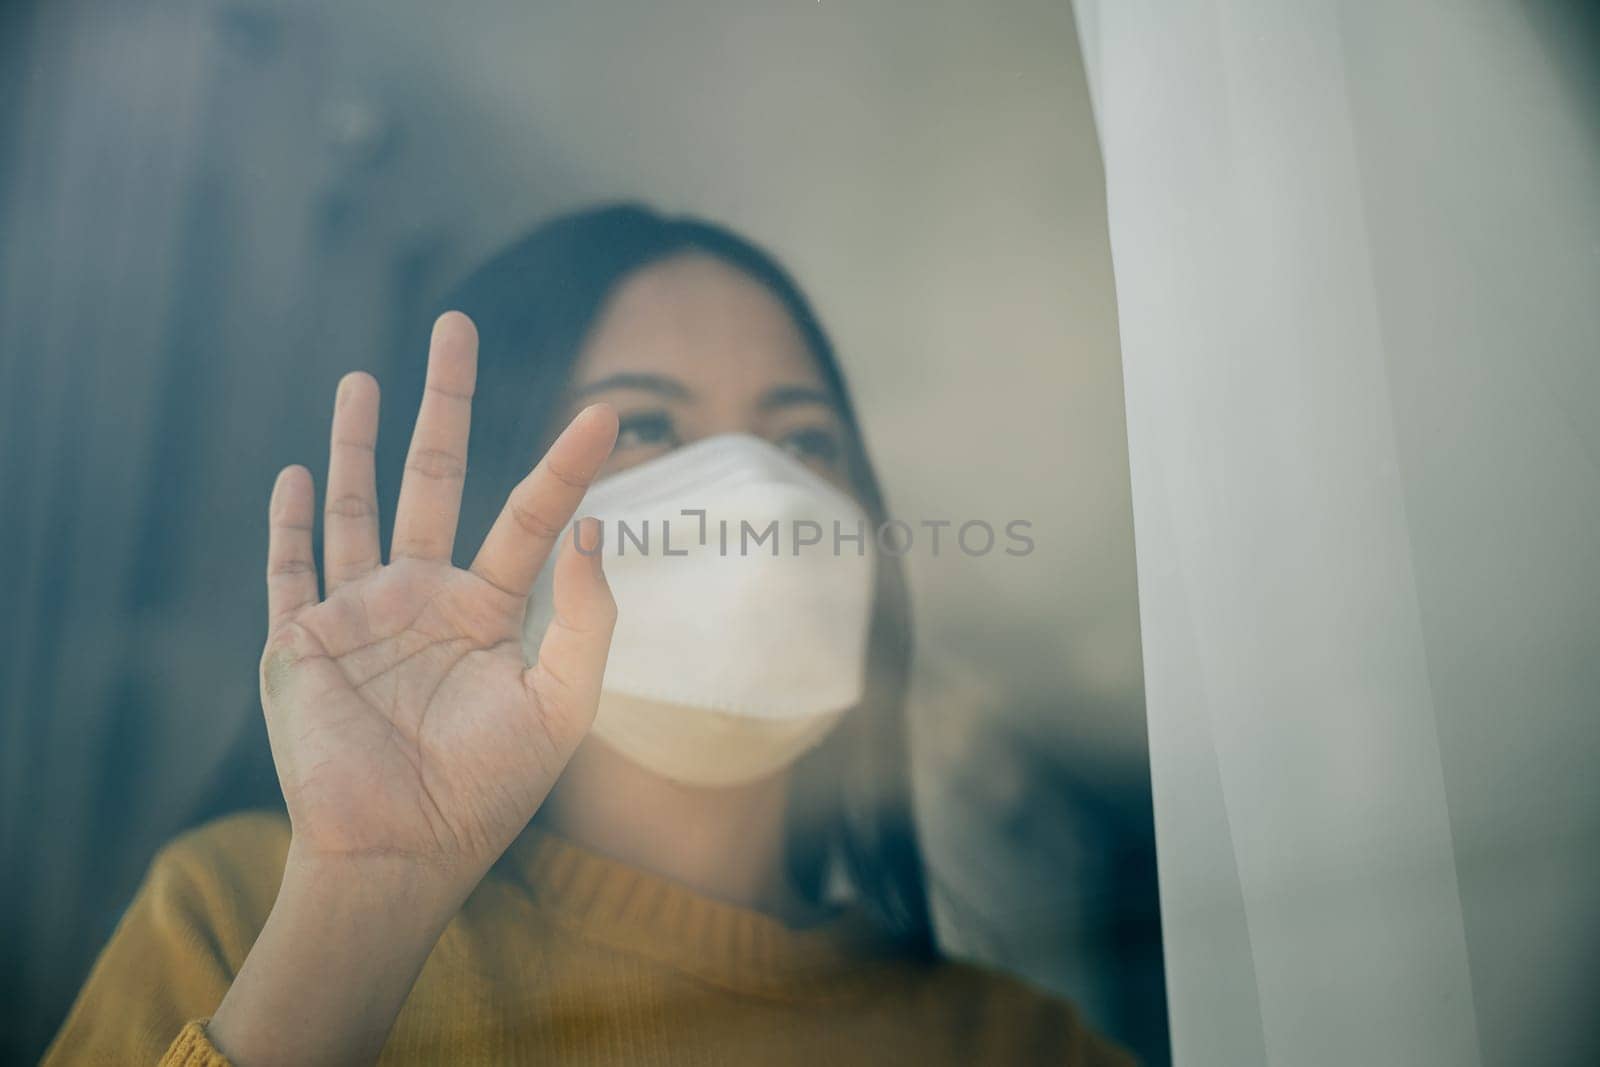 A woman wearing a medical mask practices self-isolation at home emphasizing COVID-19 prevention during the outbreak and the concept of home quarantine.